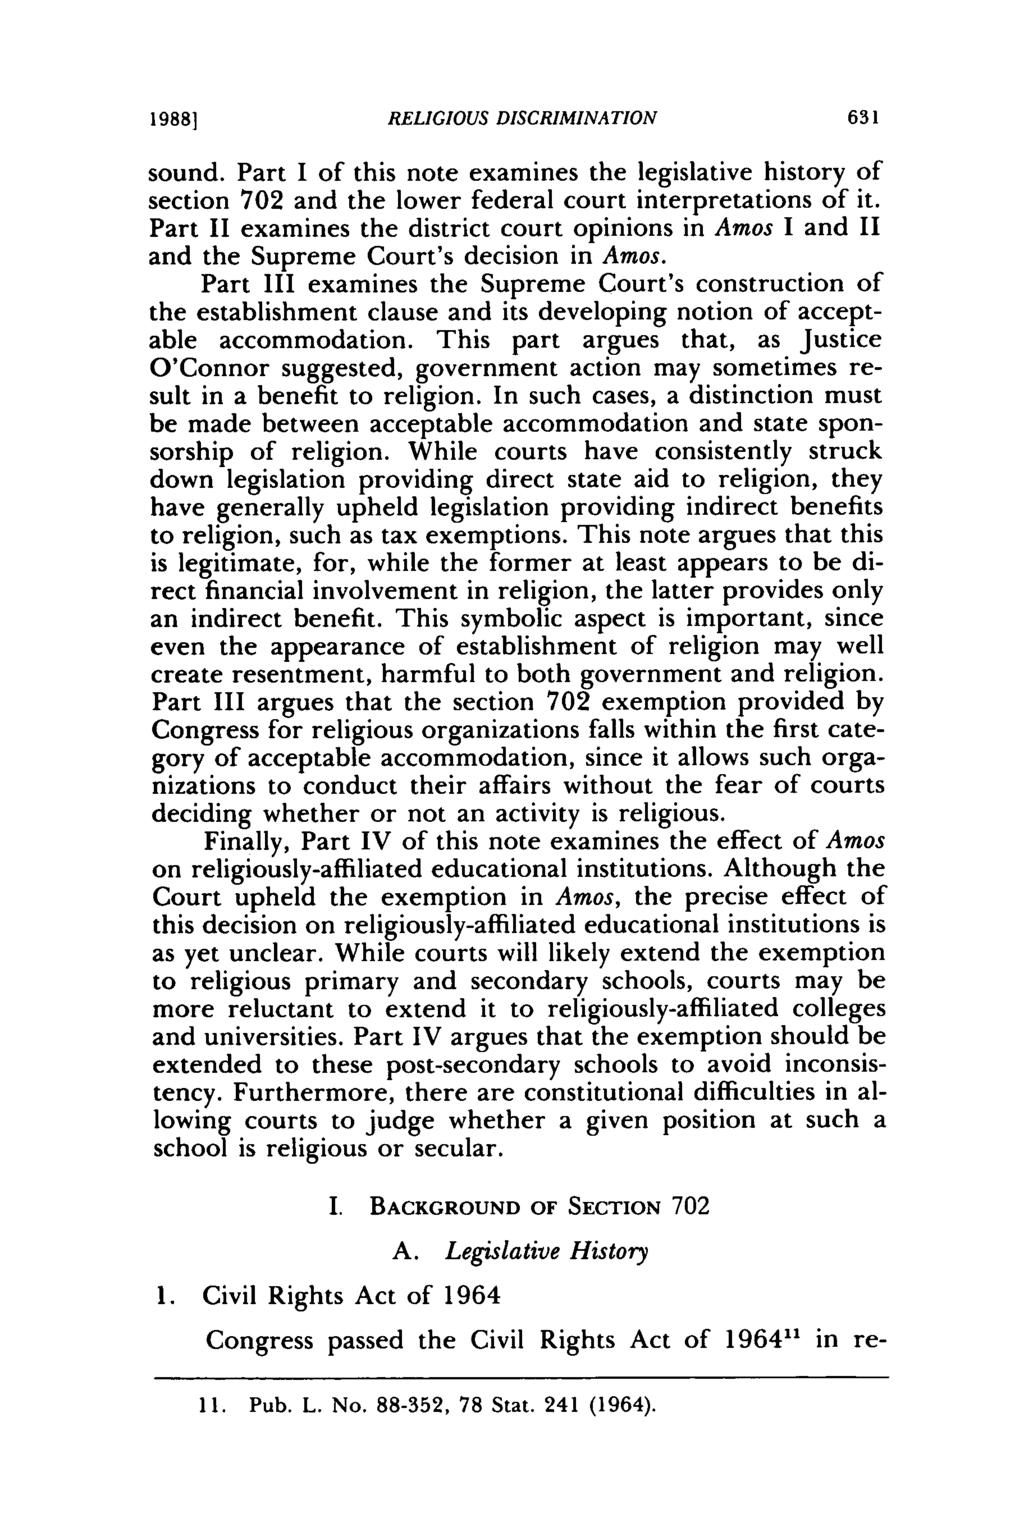 19881 RELIGIOUS DISCRIMINATION sound. Part I of this note examines the legislative history of section 702 and the lower federal court interpretations of it.